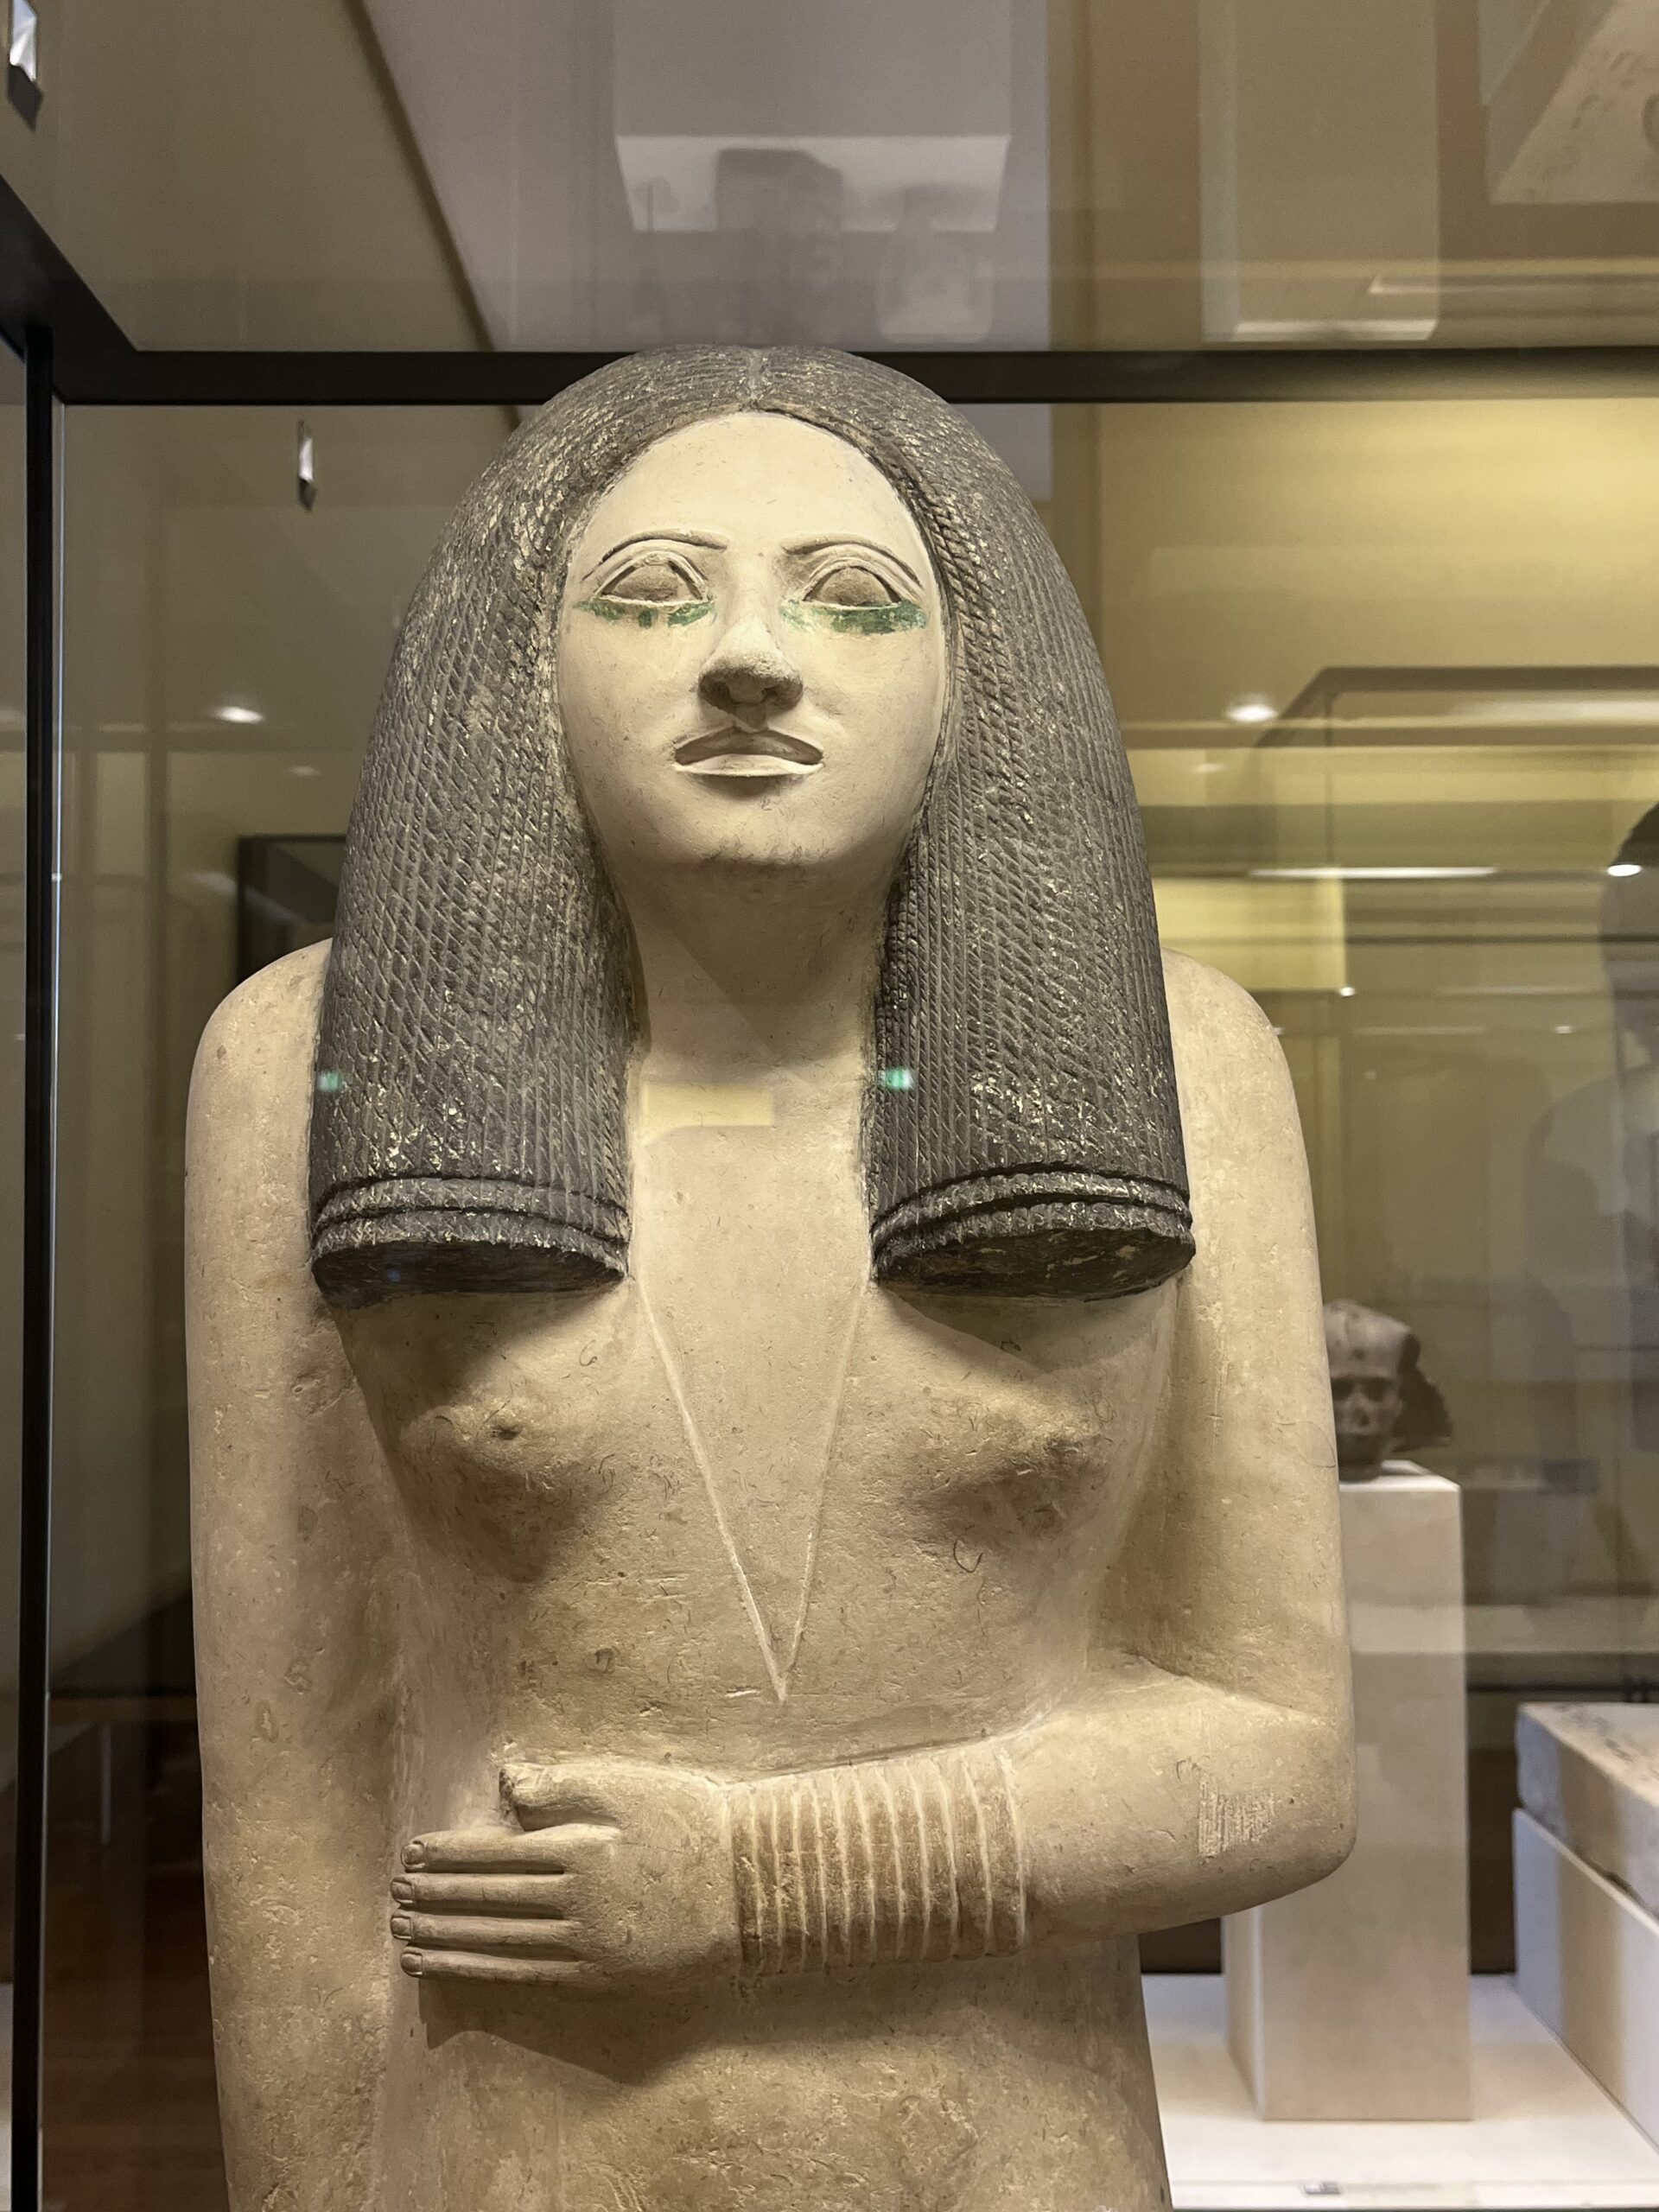 Lady Nesa, from 3rd Dynasty (Louvre collection) c) Laura Ranieri Roy